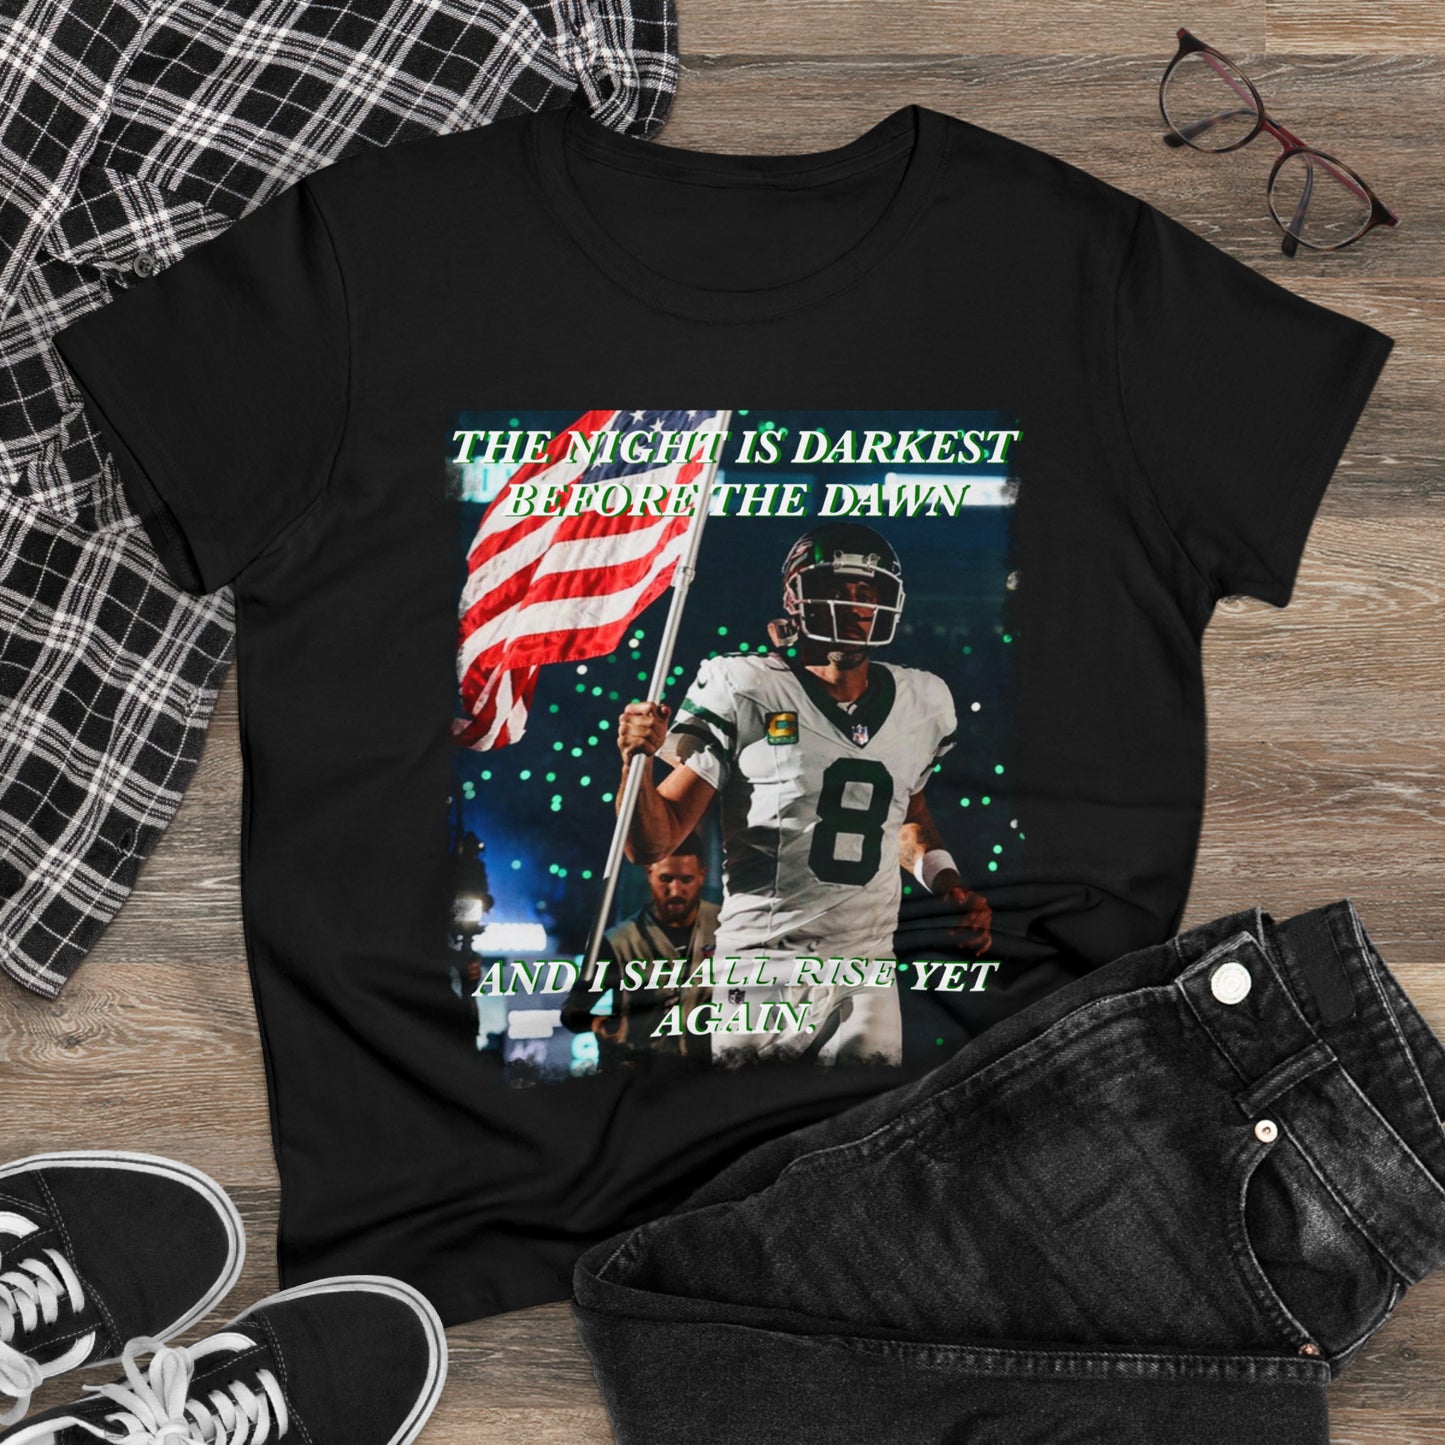 Womens AAron Rodgers Night is darkest before the dawn and I shall rise again tee